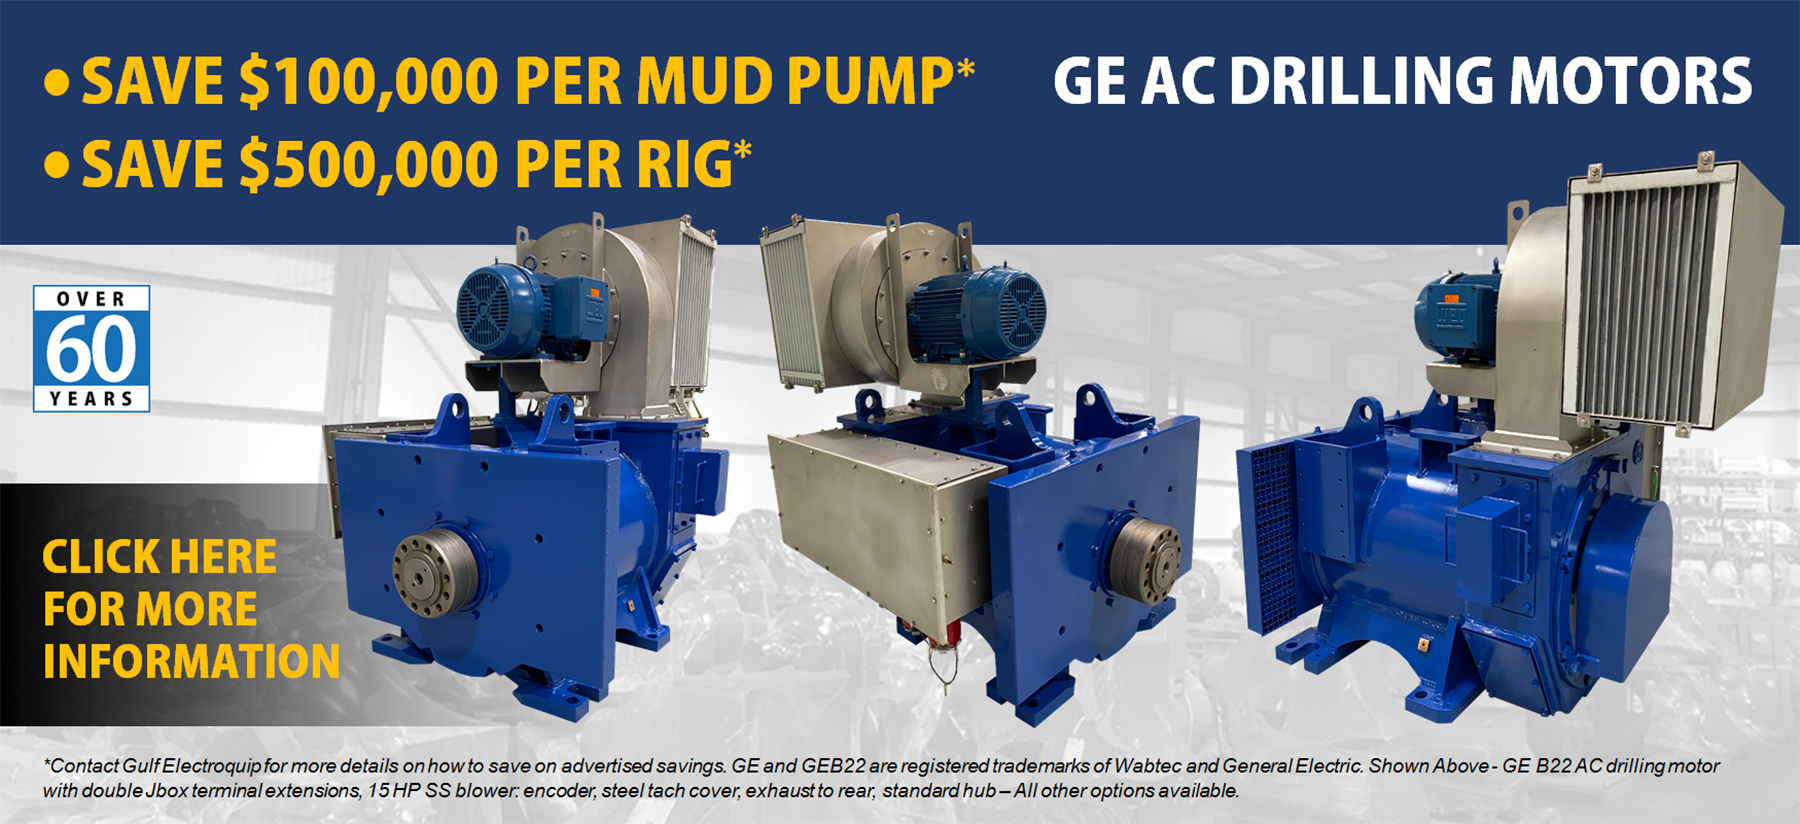 Save on GE AC Drilling Motors in stock. Contact us today to see how!